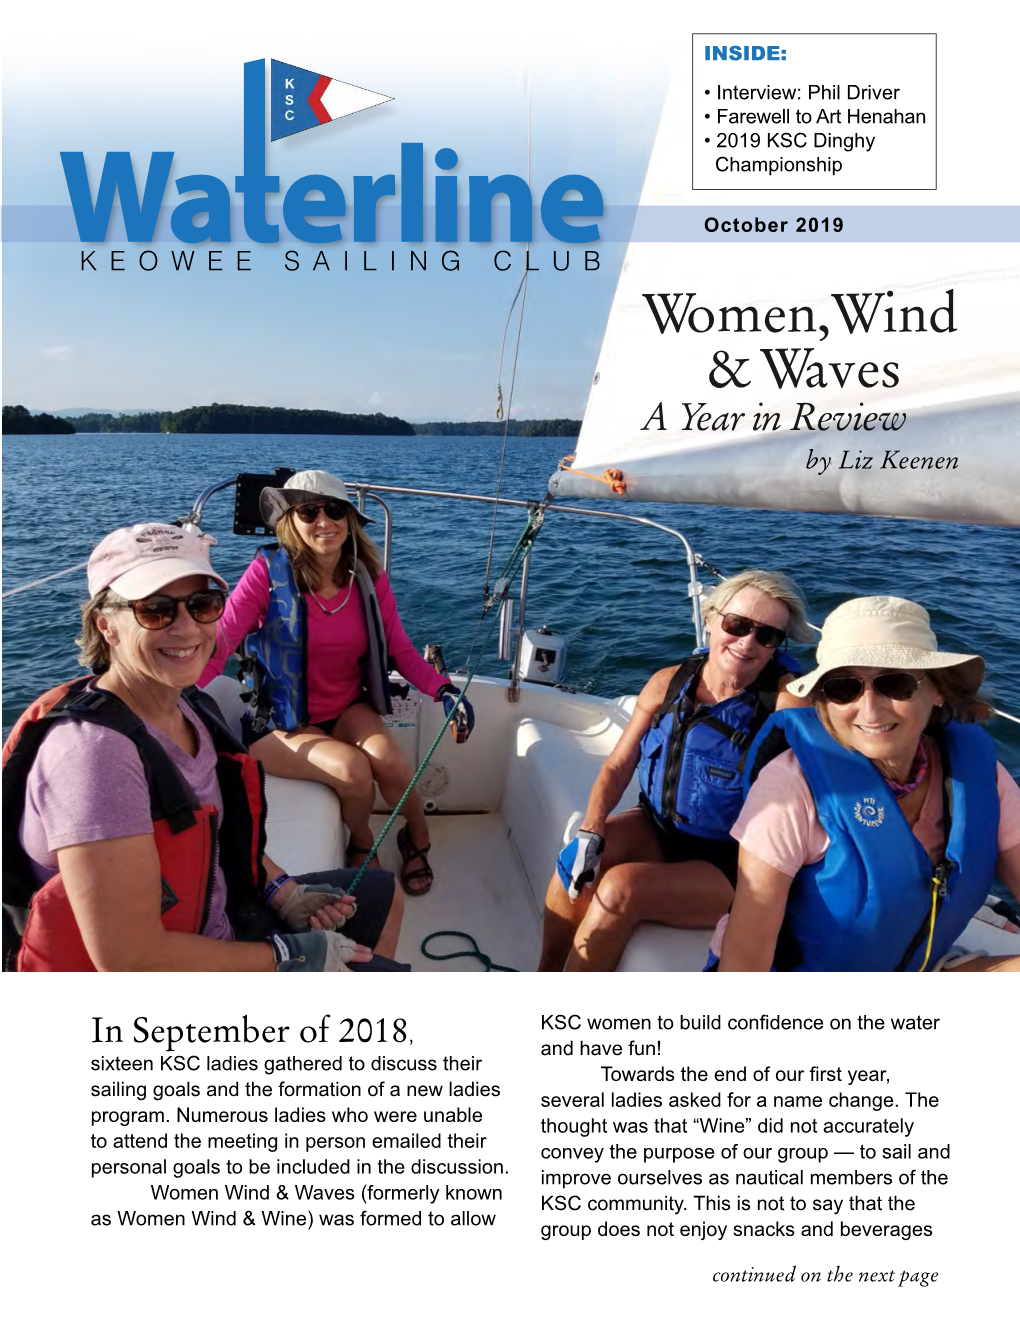 October 2019 KEOWEE SAILING CLUB Women,Wind & Waves a Year in Review by Liz Keenen